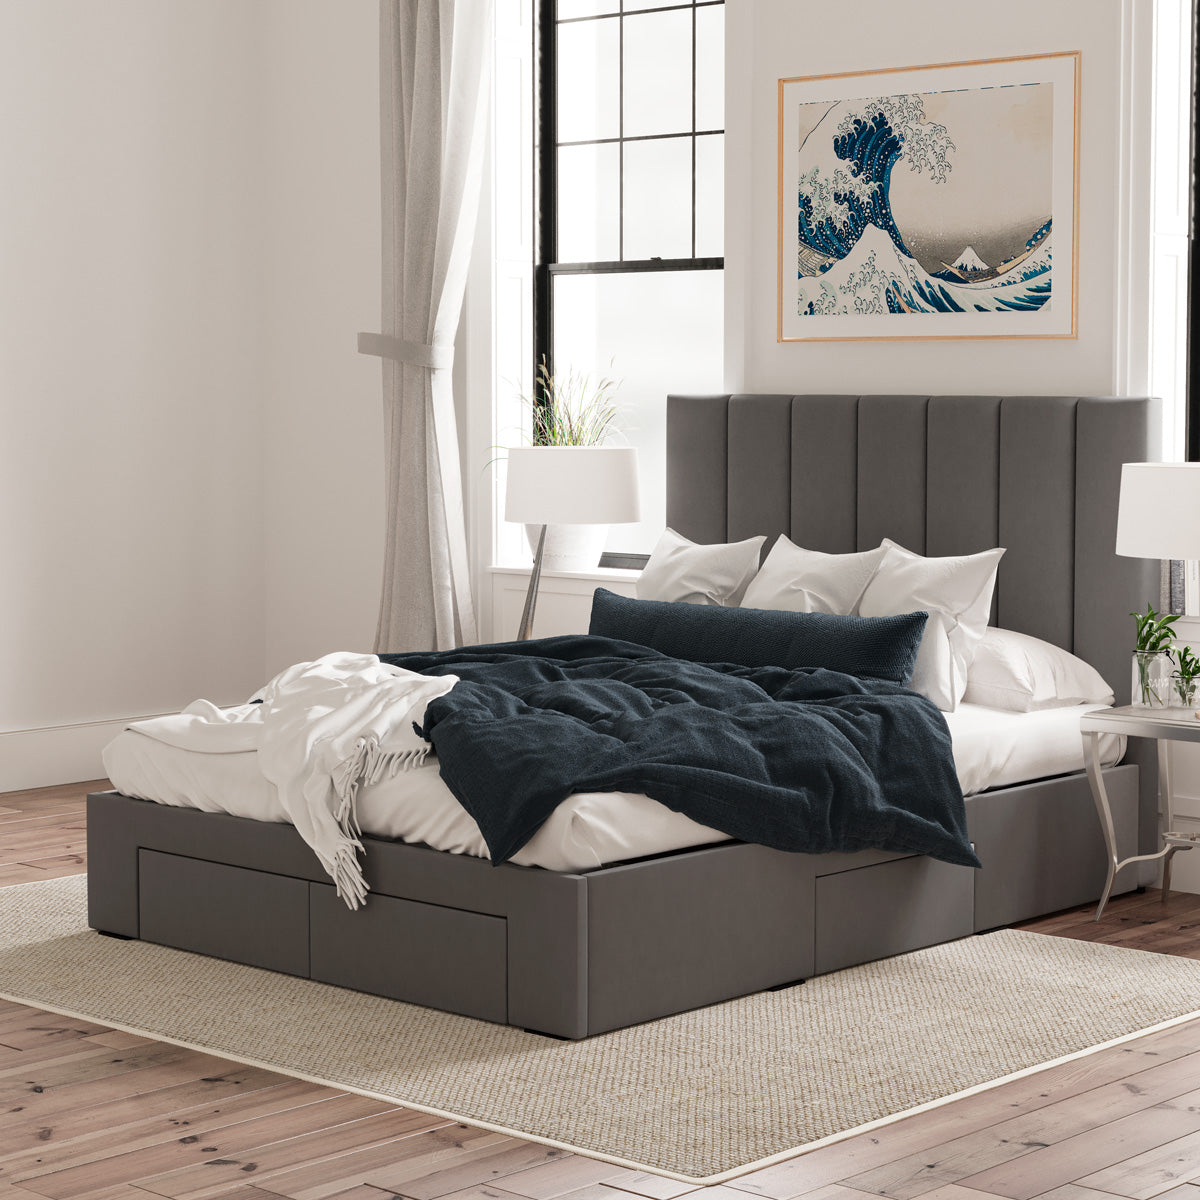 Celine Bed Frame with Four Storage Drawers (Charcoal Fabric)